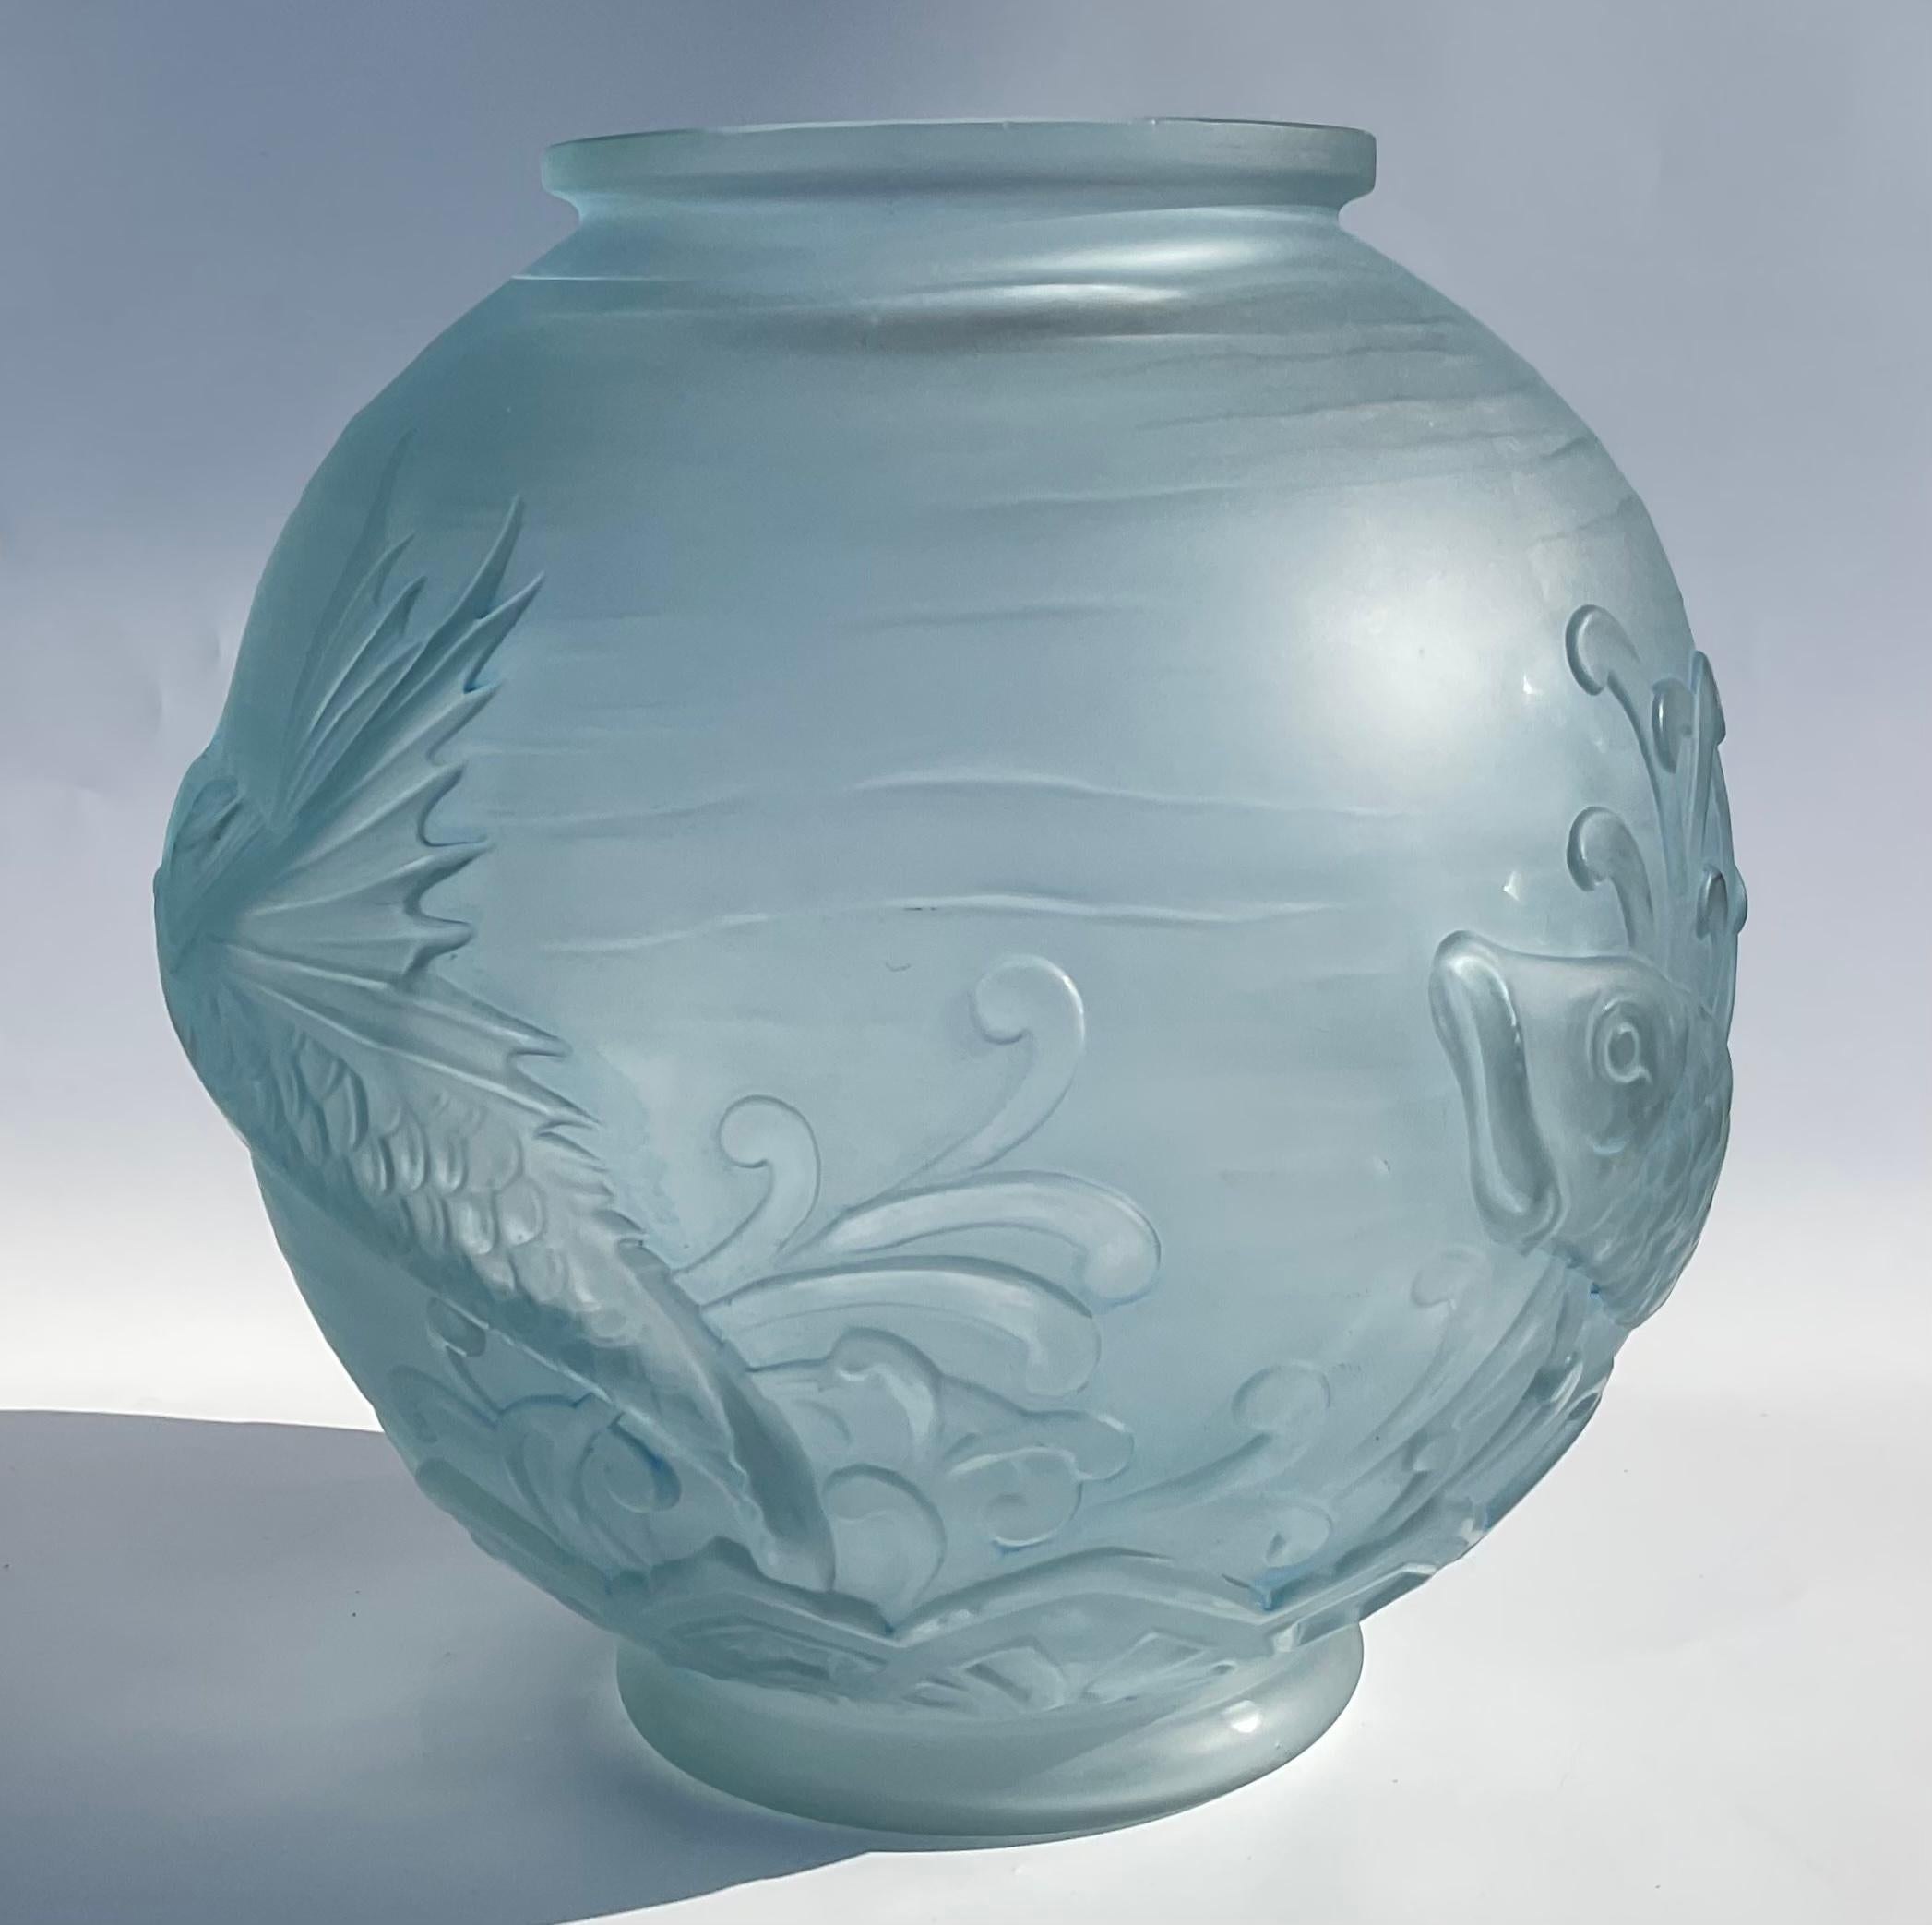 Large Pierre D’avesn Large French Art Deco Flying Fish Vase circa 1930s Blue In Good Condition For Sale In Ann Arbor, MI